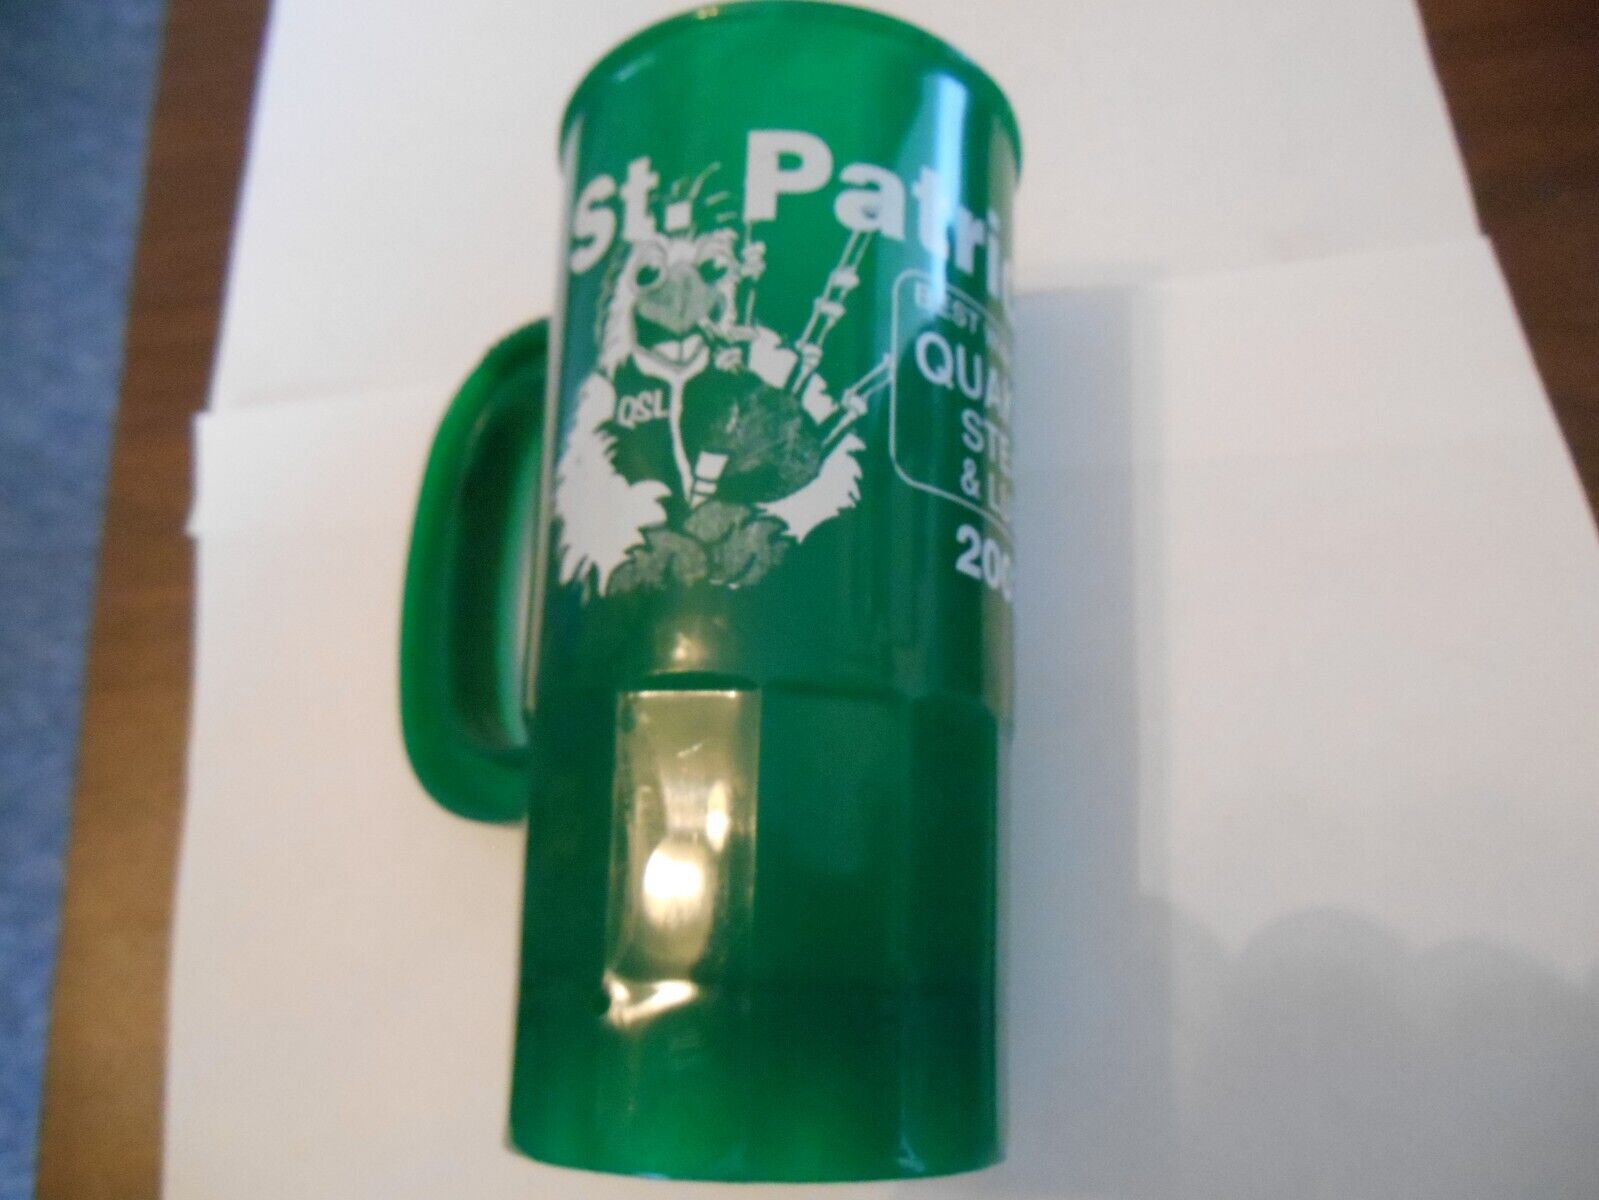 St.Patty's Day plastic cup Green w/ white Lettering 2003 Quaker Steak & Lube